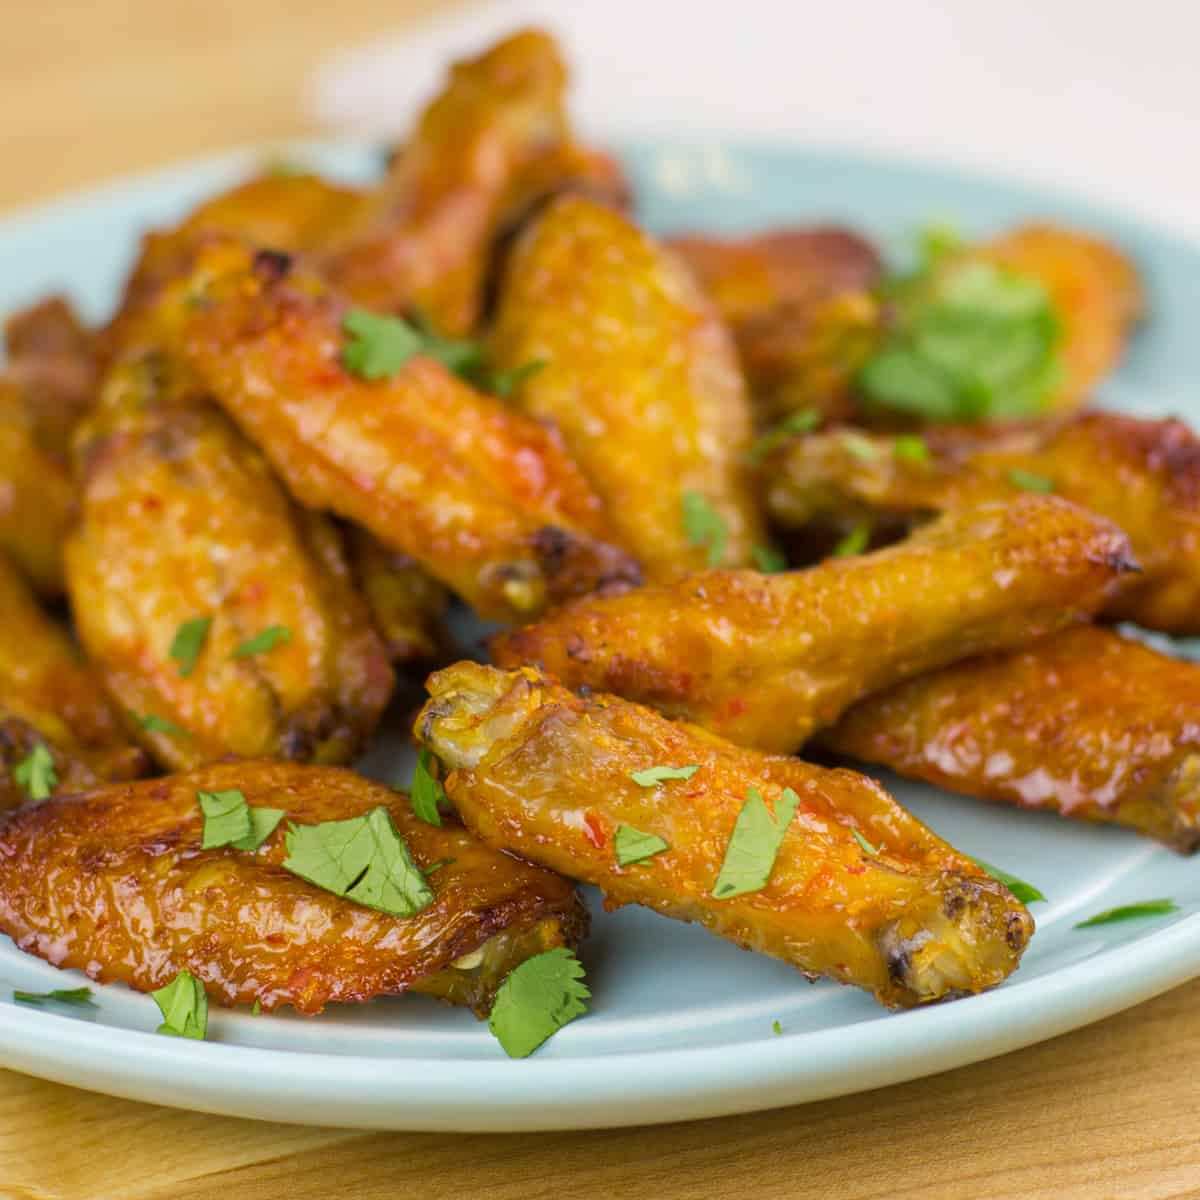 A plate of baked chicken wings.